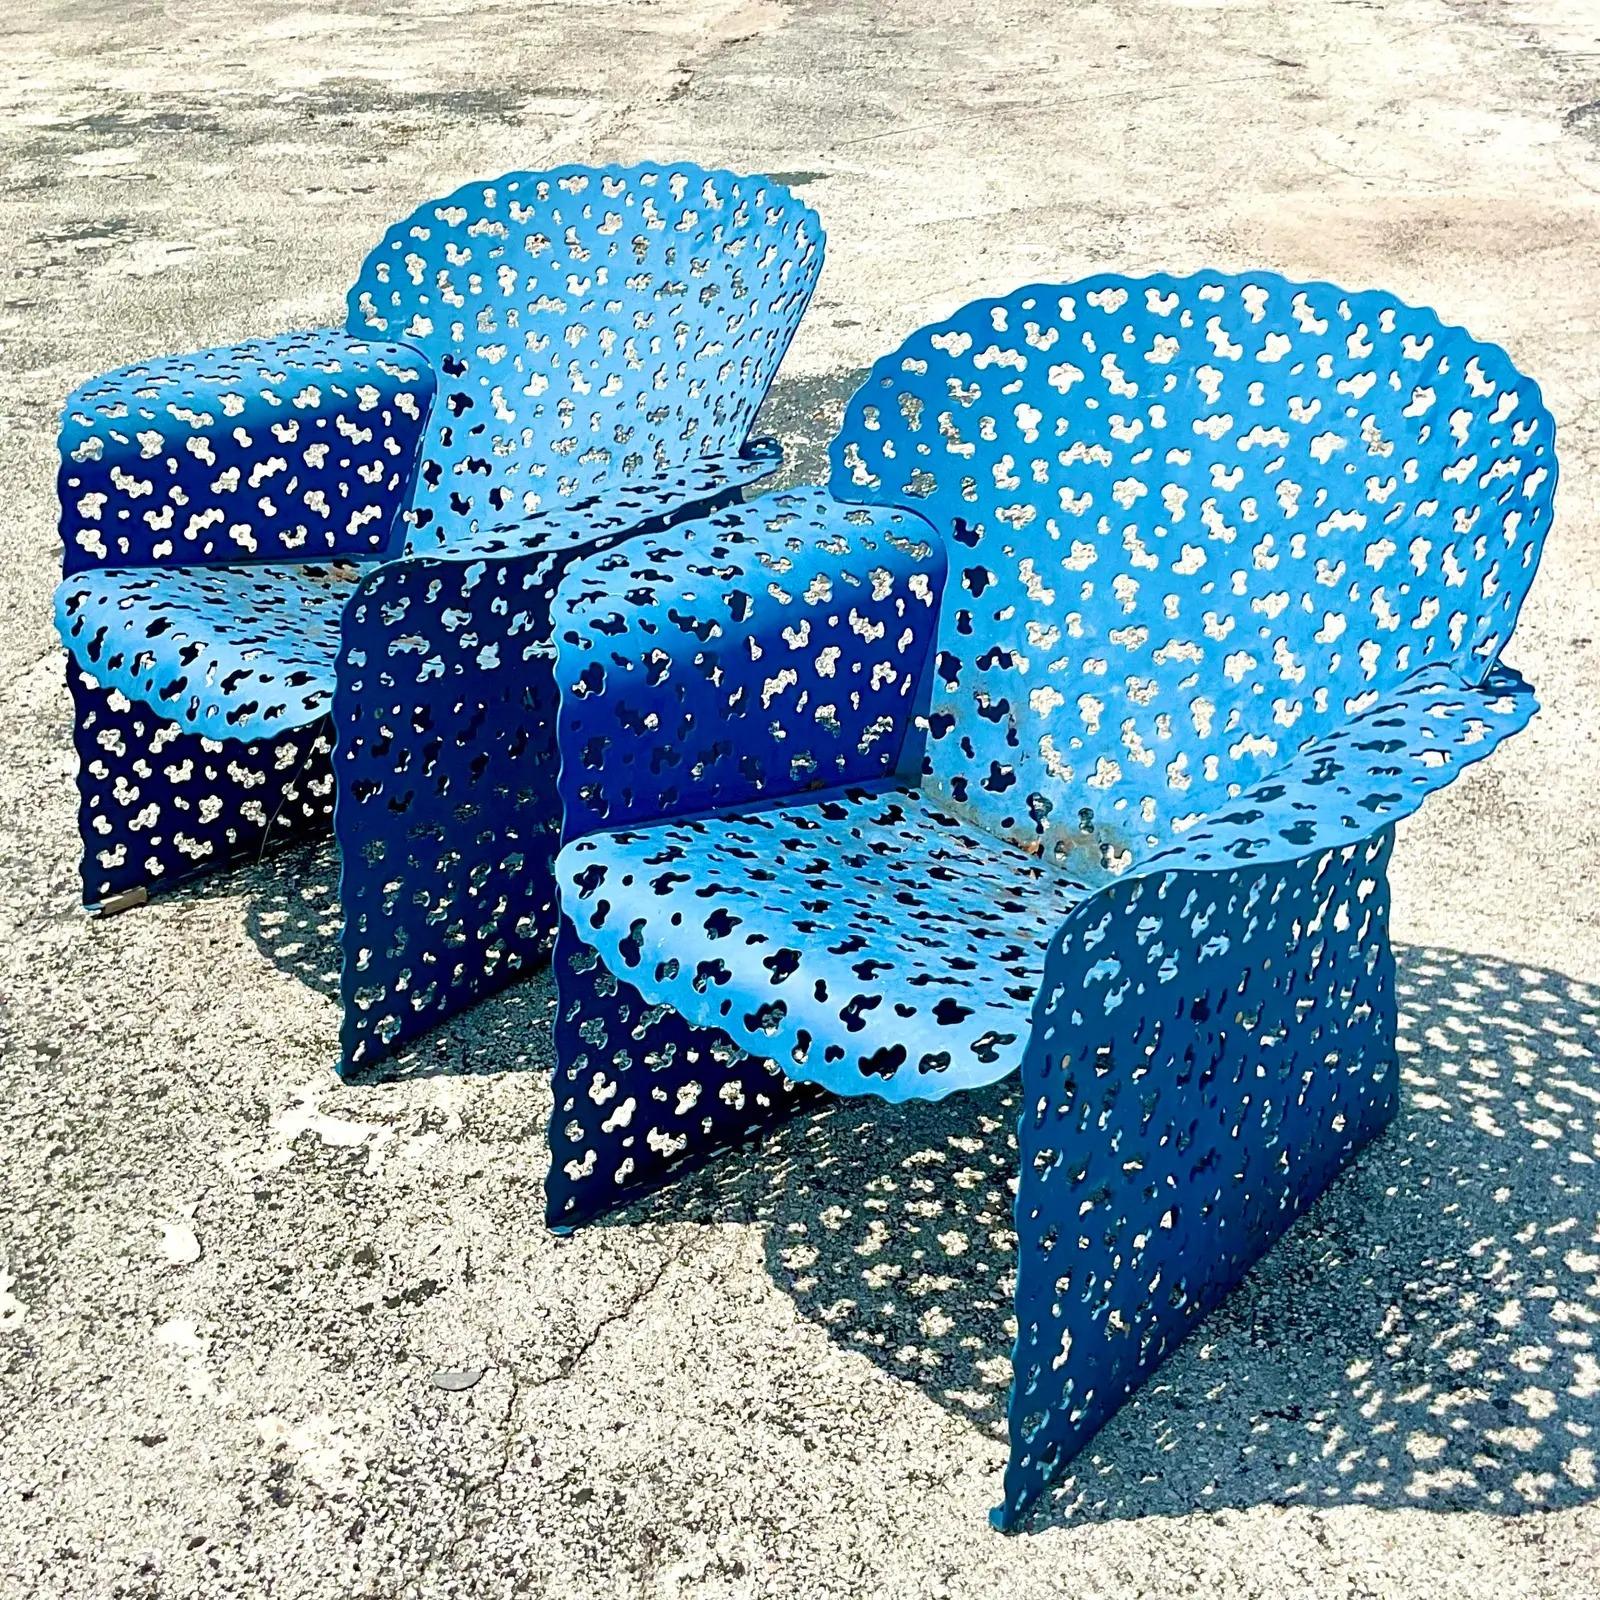 Fantastic vintage Contemporary Knoll Studios outdoor lounge chairs. A a fabulous pair designed by Richard Schultz. Part of his iconic Topiary collection. Inspired by the dappled sunlight that comes through a manicured shrub. Matching pieces also